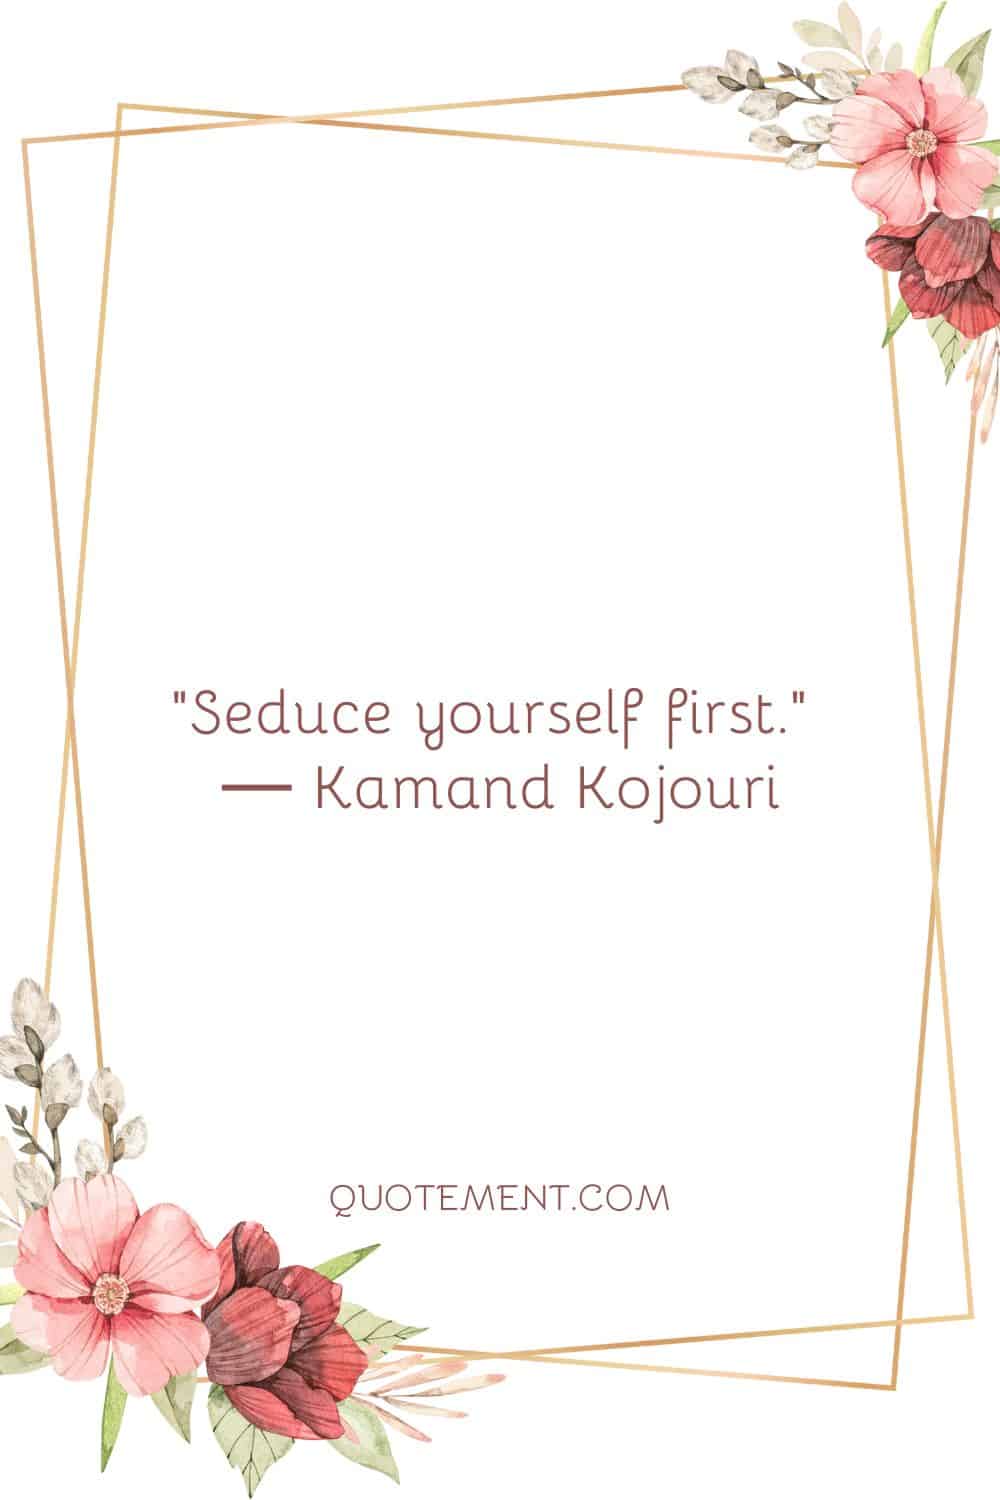 Seduce yourself first